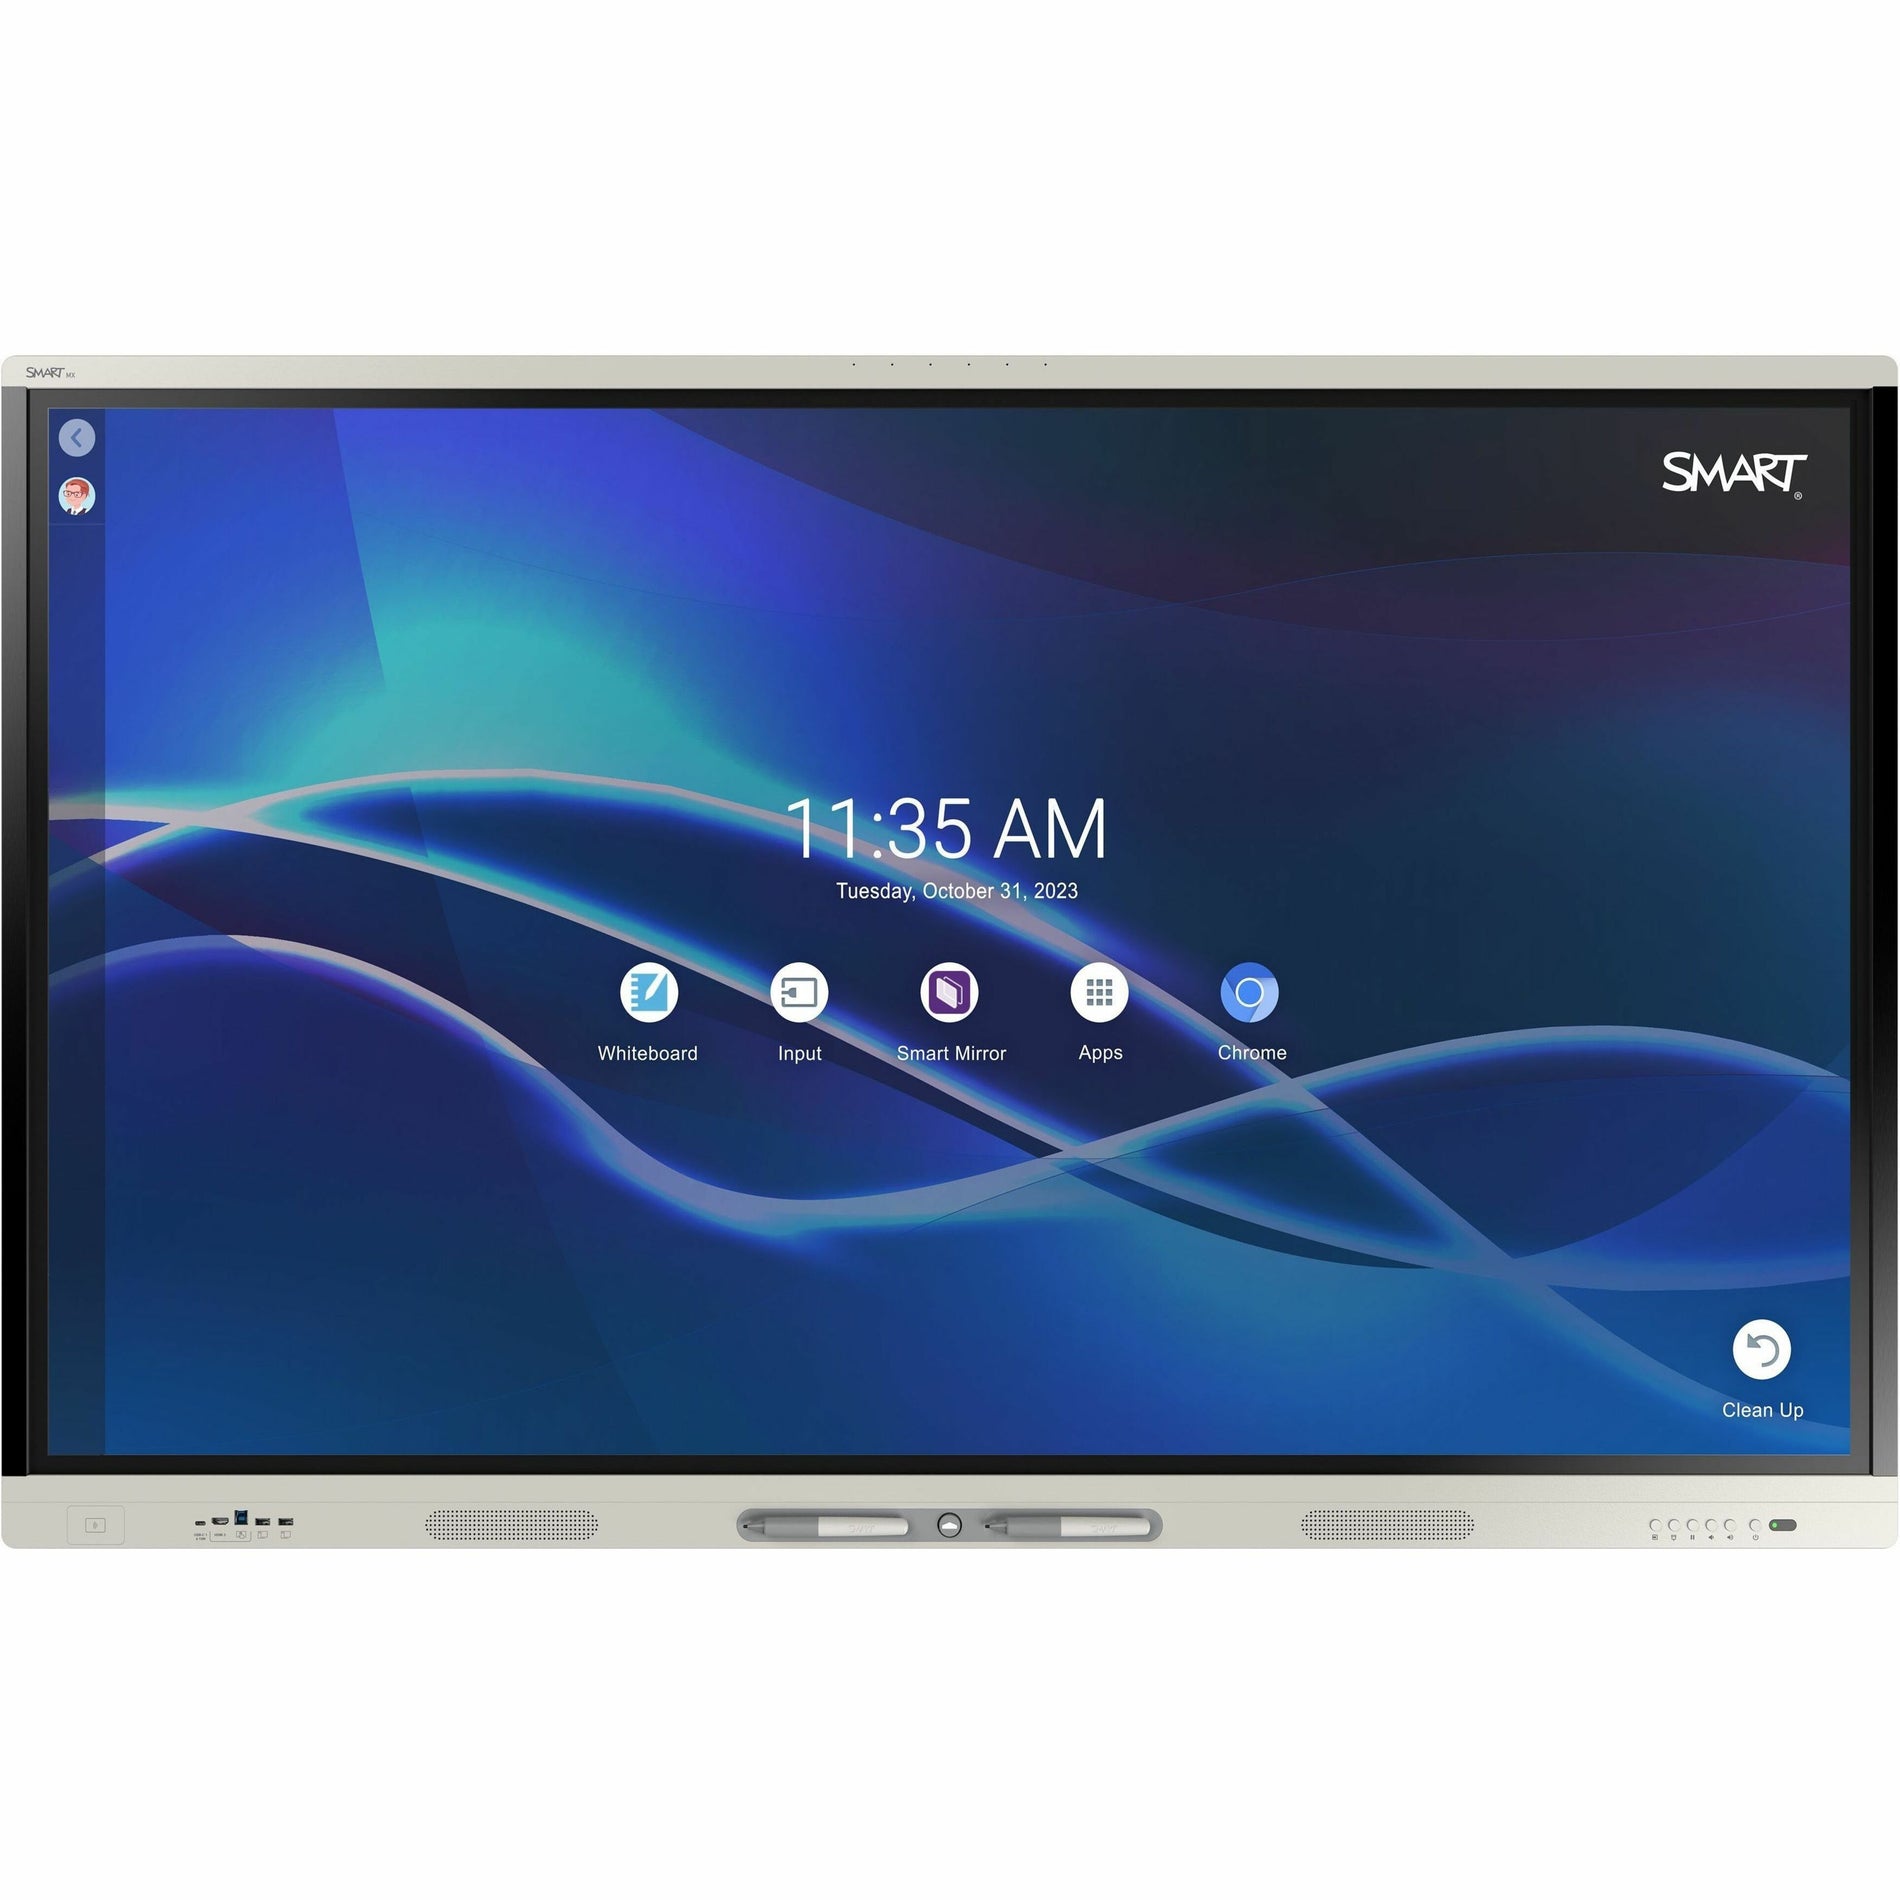 SMART Board SBID-MX275-V4-PW MX075-V4 Pro Series Interactive Display with iQ - White, 75" 4K UHD LCD, Android 11, 6GB RAM, 3 Year Warranty